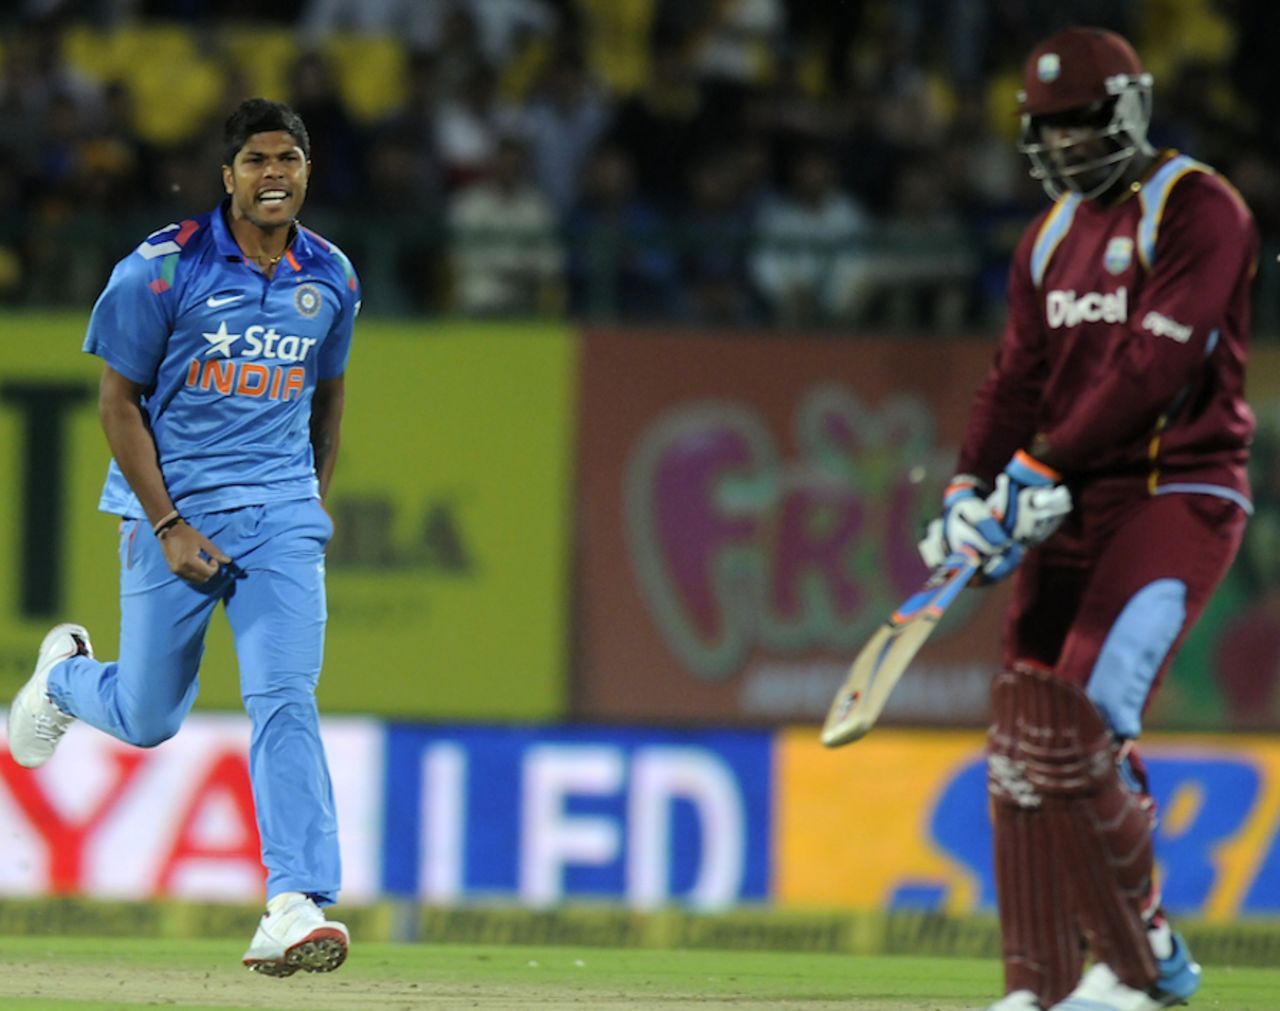 Umesh Yadav is pumped after dismissing Andre Russell, India v West Indies, 4th ODI, Dharamsala, October 17, 2014